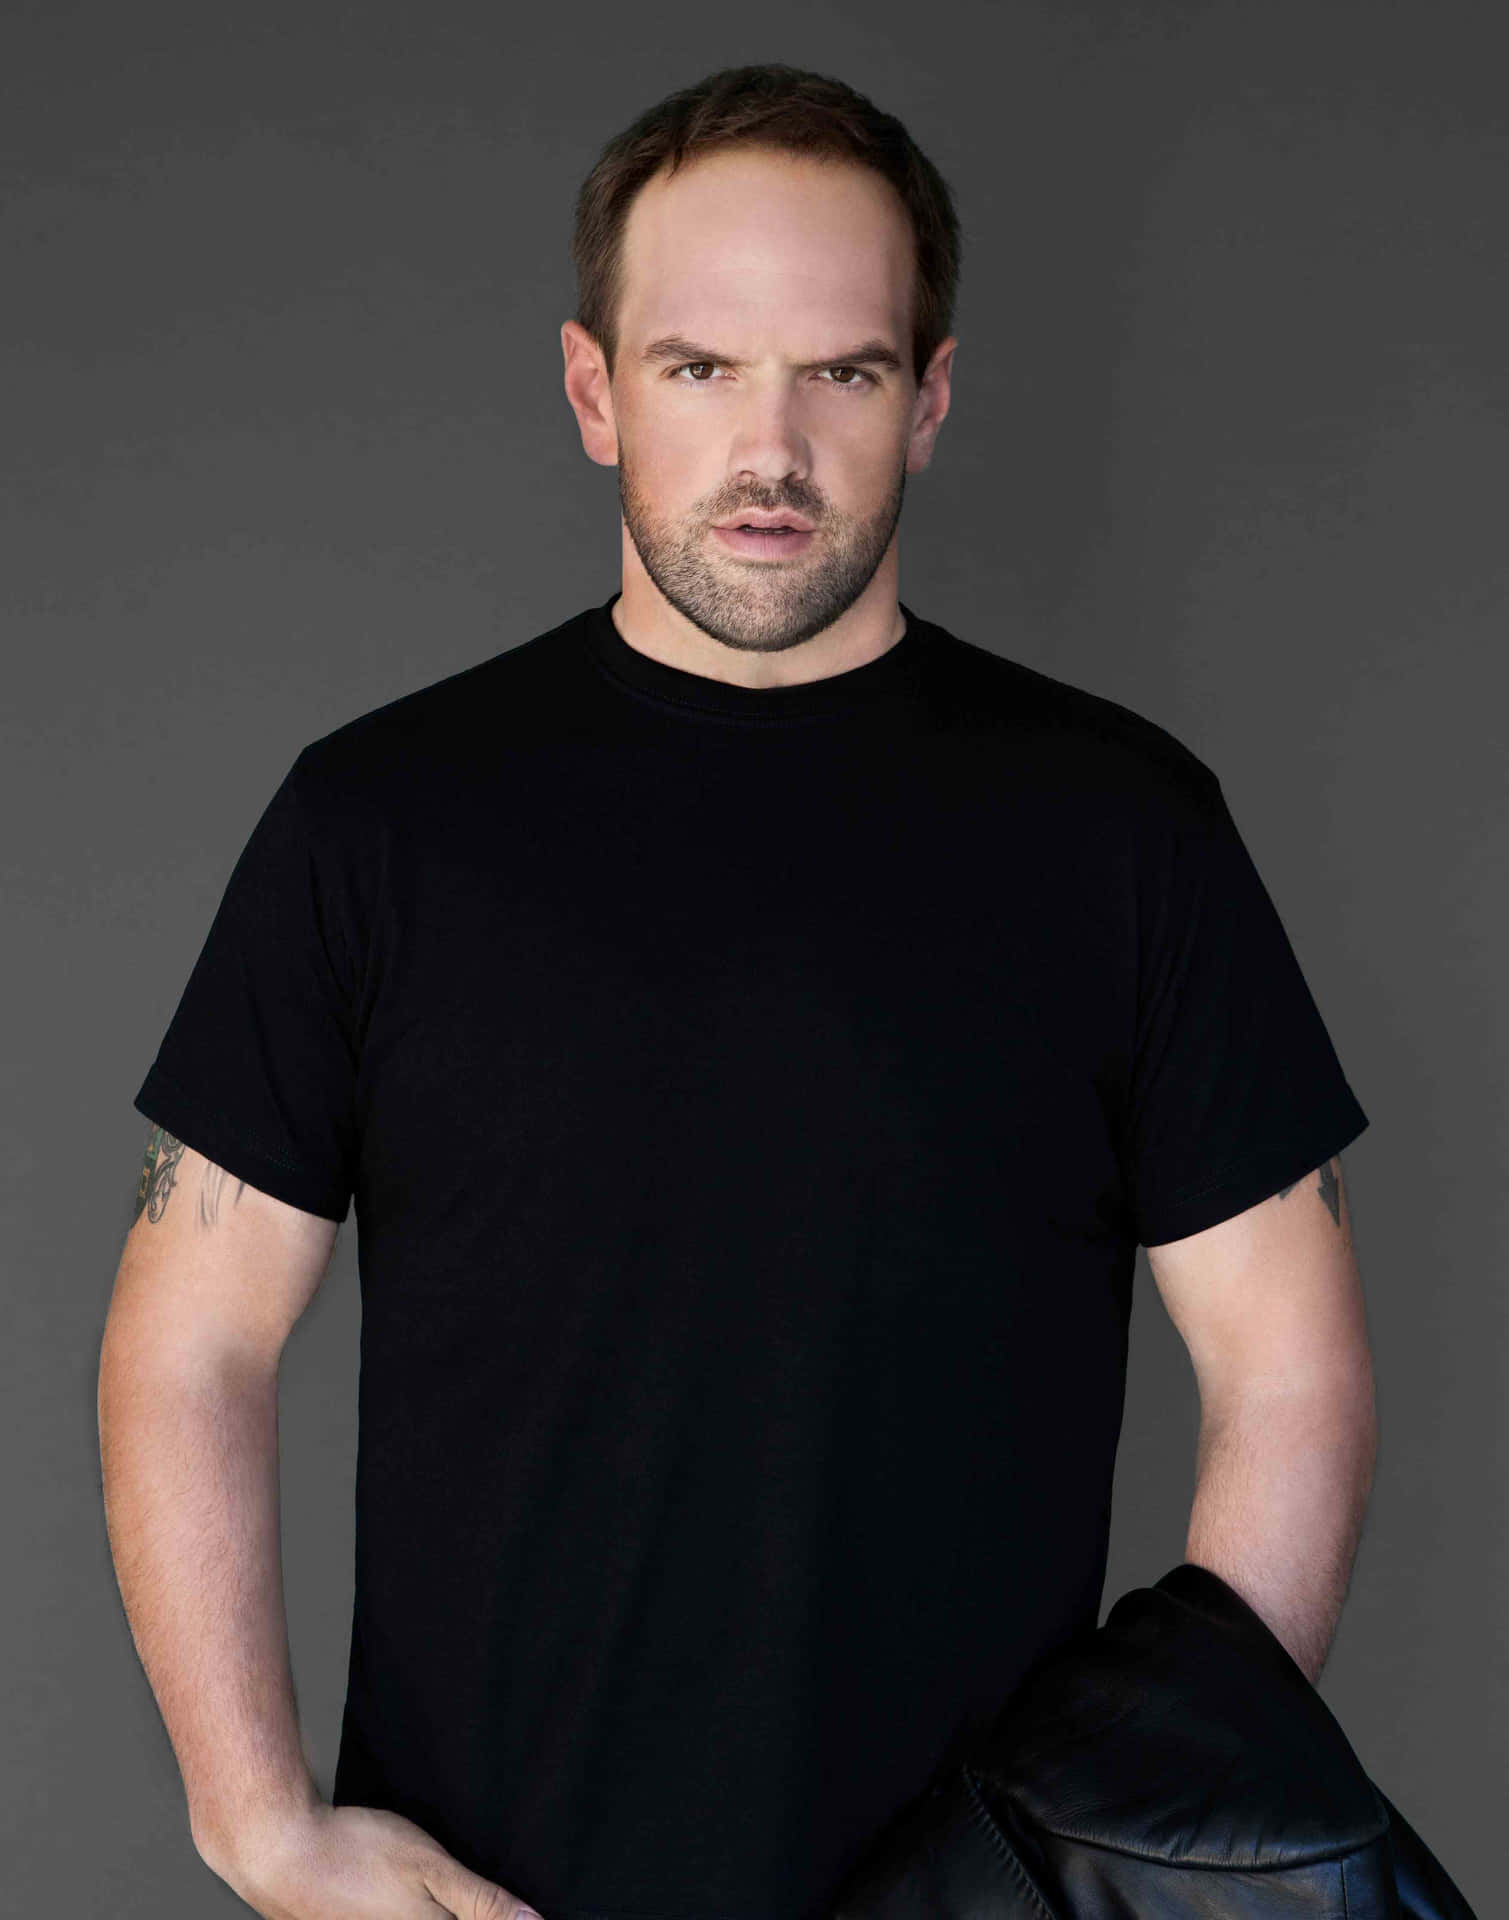 Ethansuplee Is An American Actor Known For His Roles In Movies And Tv Shows Such As Remember The Titans, My Name Is Earl, And The Wolf Of Wall Street. Fondo de pantalla